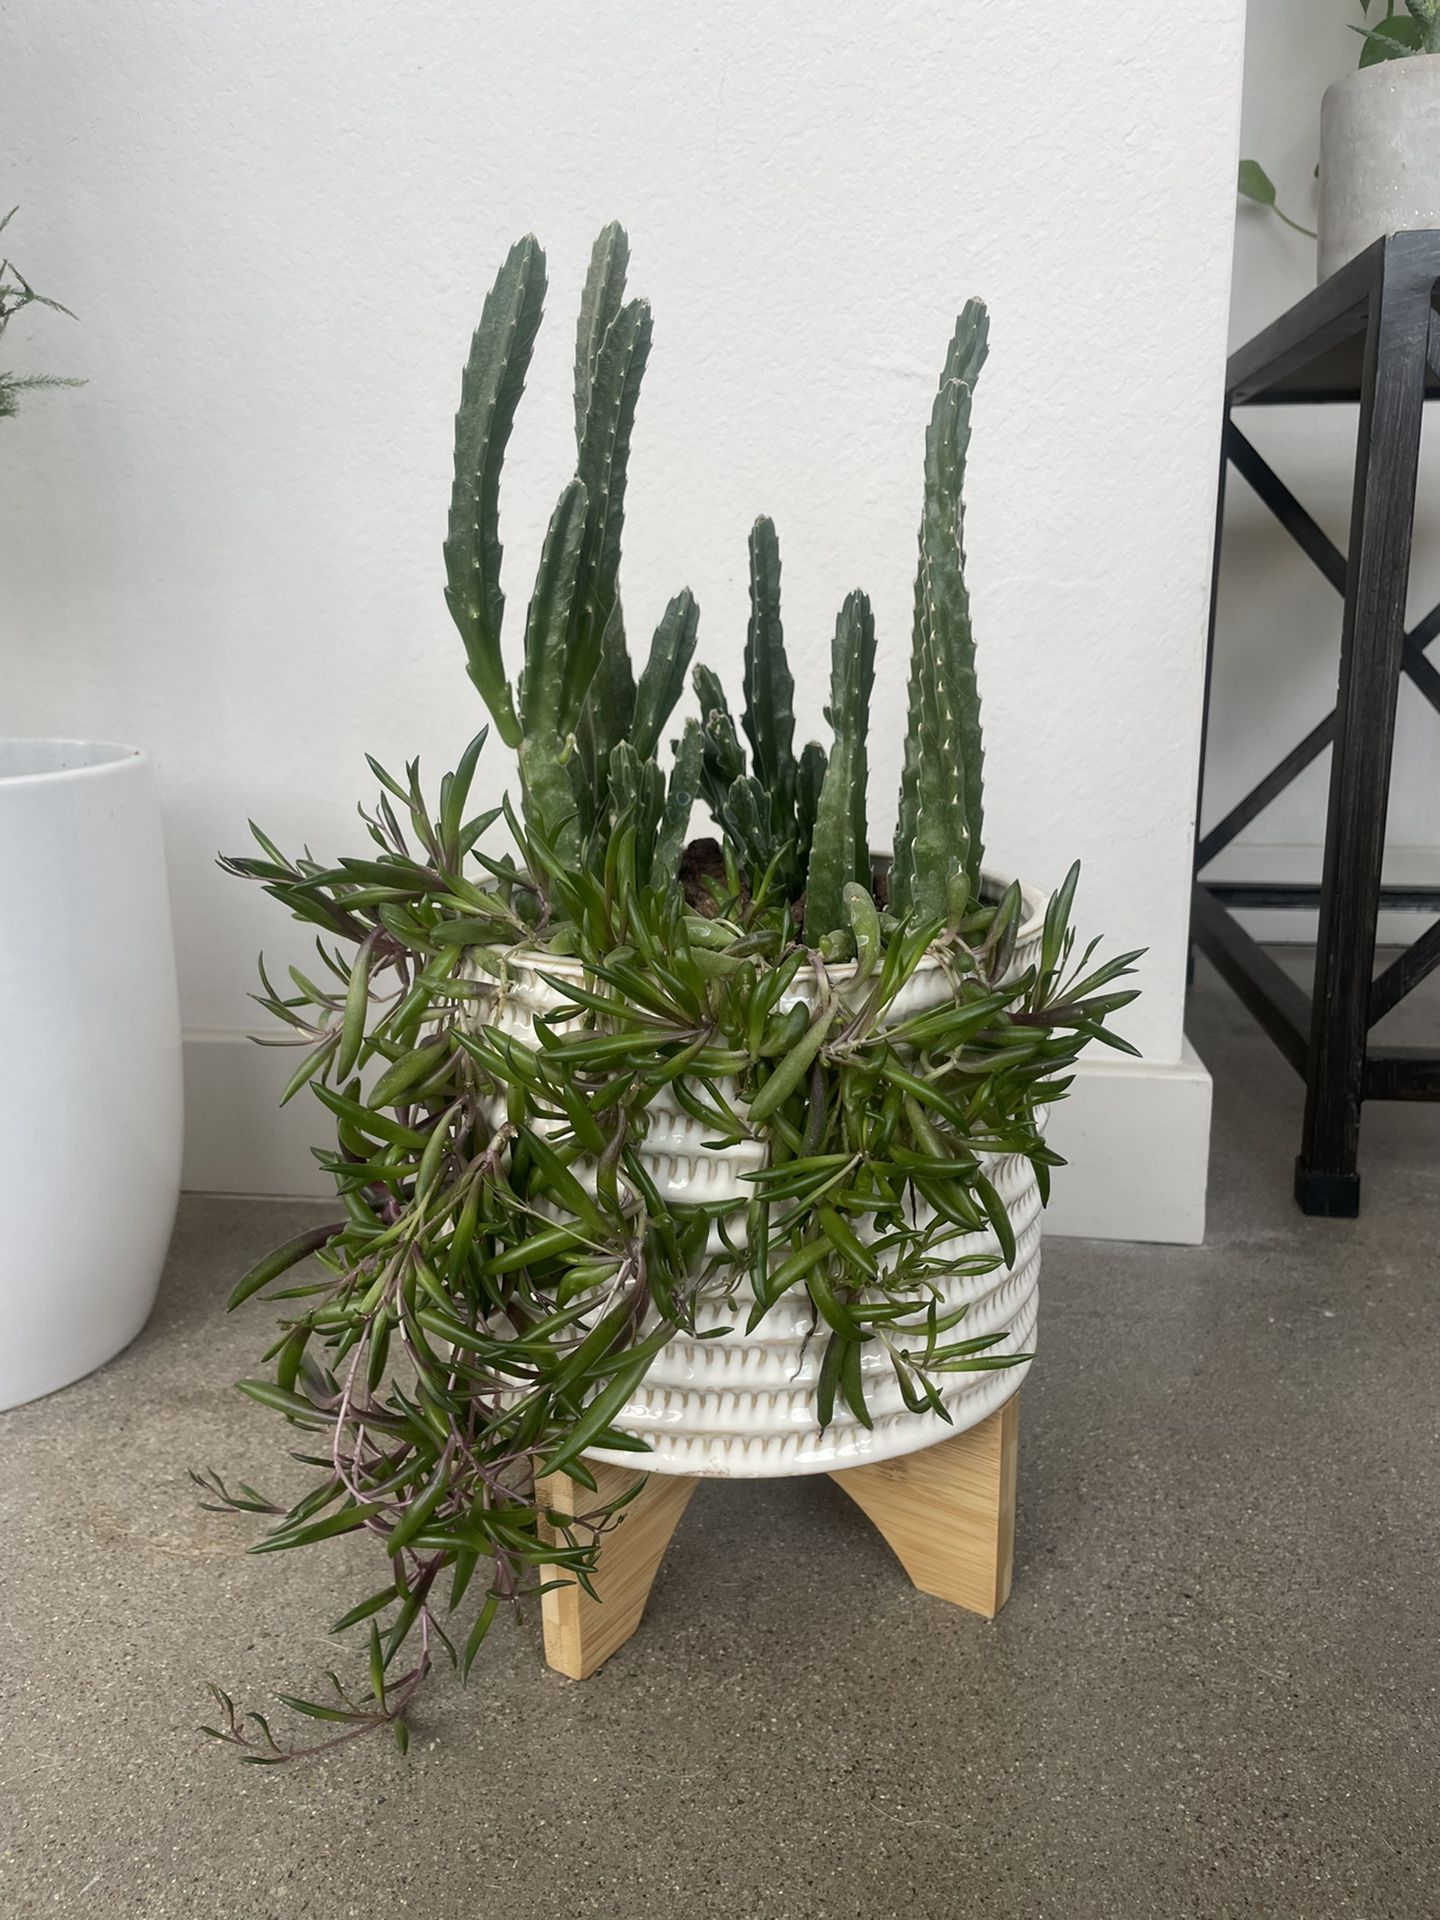 Live Zulu Giant And Little Pickles Succulents - Pot Includes 